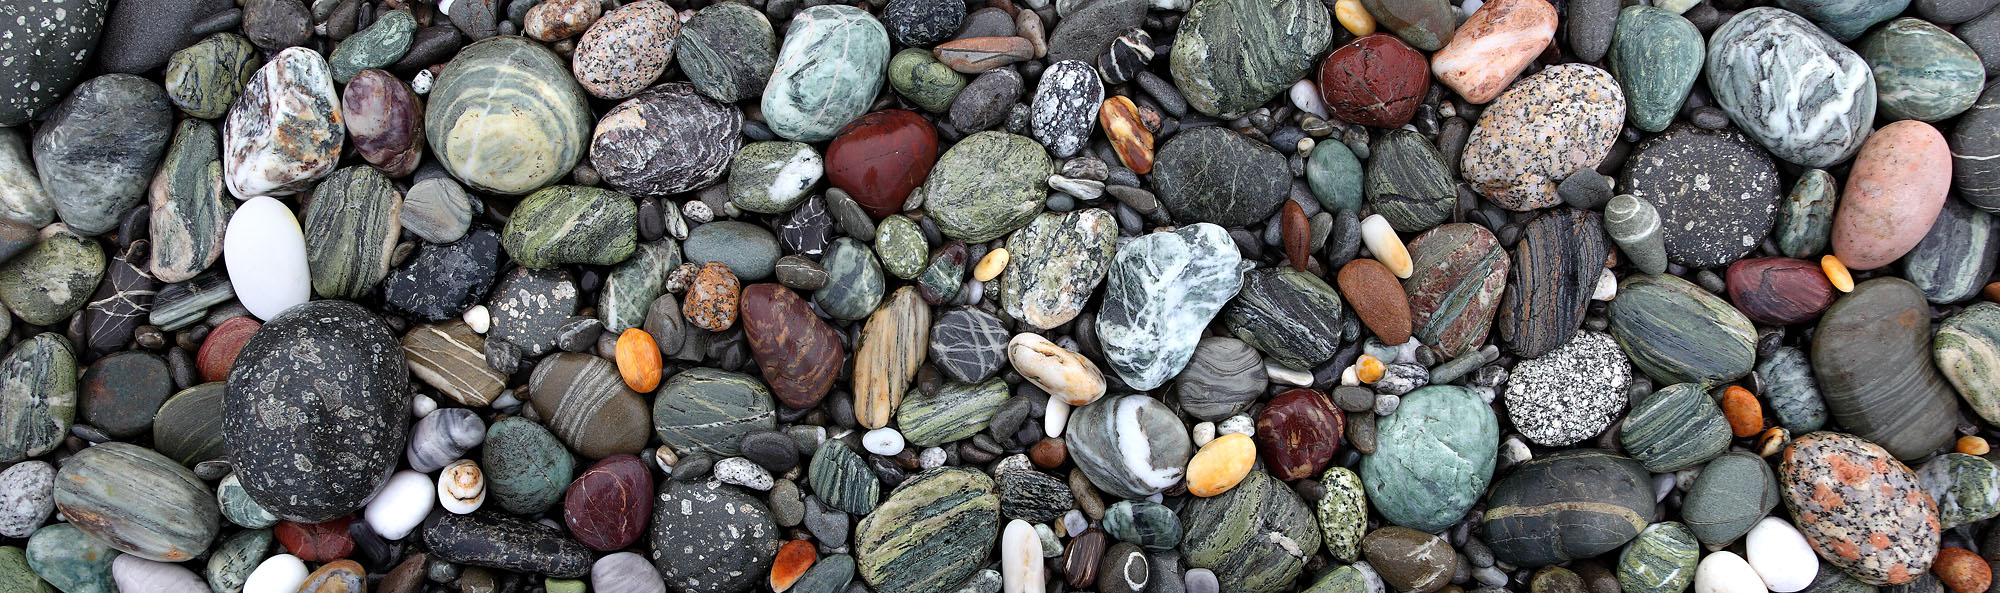 Pebbles at Gillespies Beach on New Zealands South Island